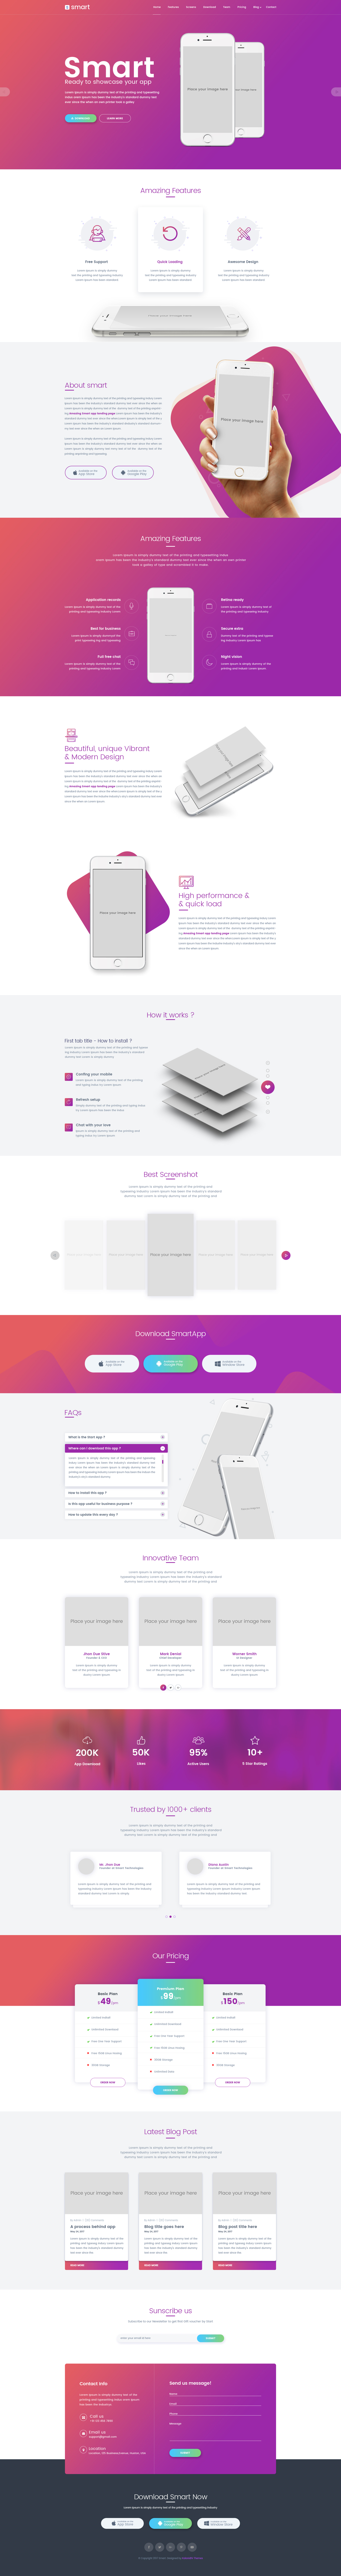 Preview 05 Smart App Landing Page pink gre nt